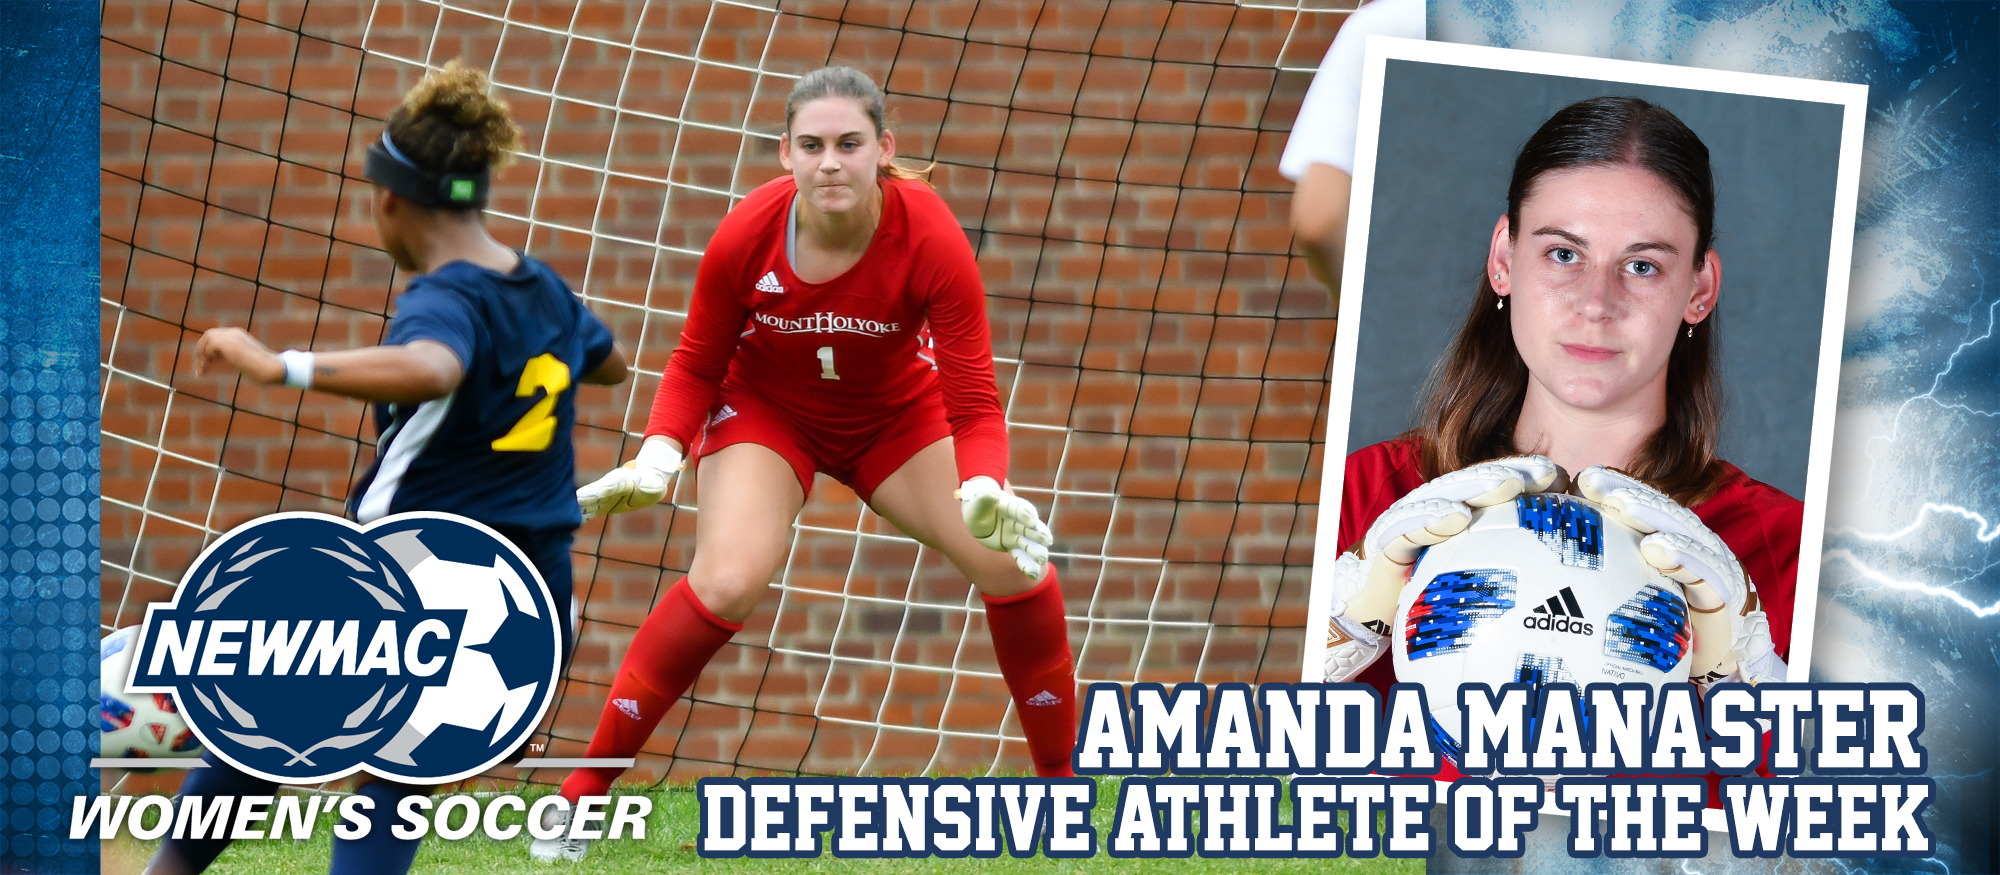 Photo showing Lyons soccer senior goalie Amanda Manaster, who was named the NEWMAC Defensive Athlete of the Week on September 4, 2018